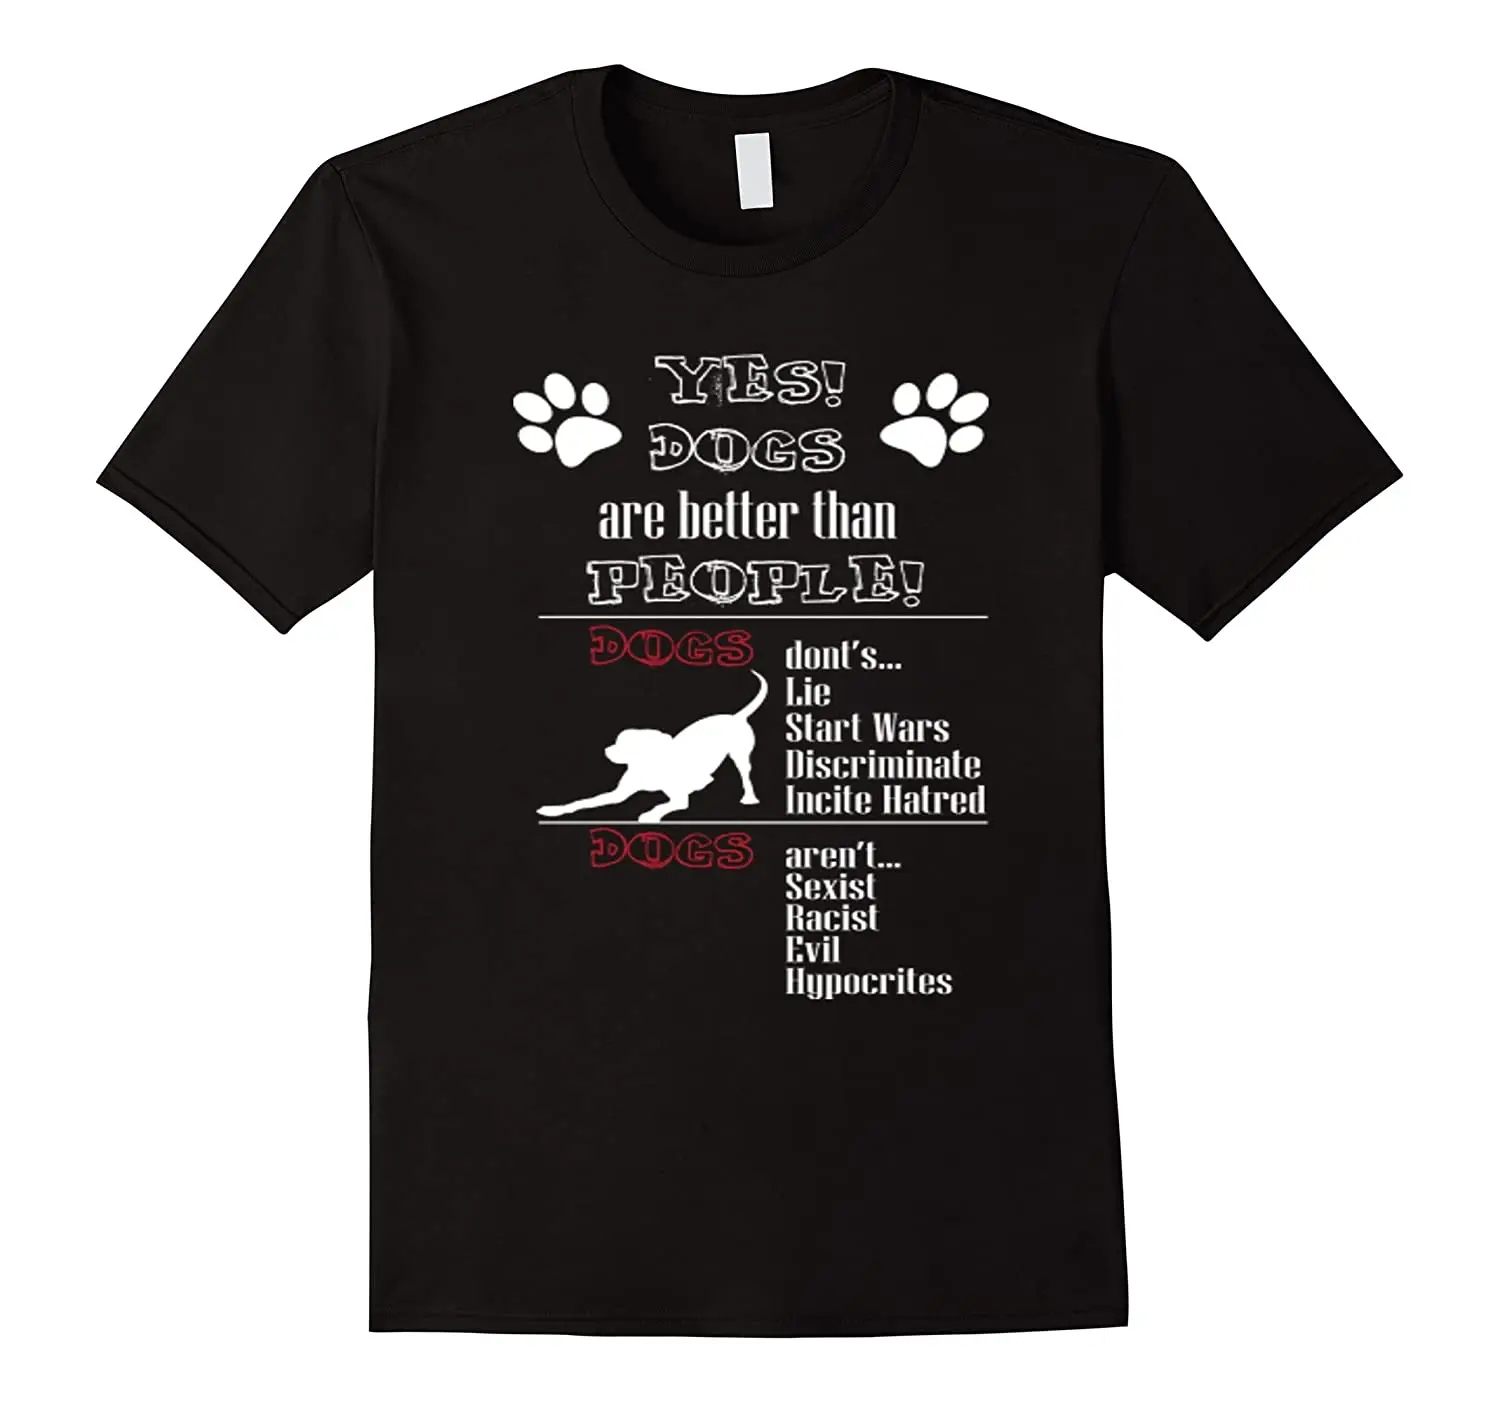 

Yes Dogs Are Better Than People. Funny Dog Lover Gift T-Shirt. Summer Cotton Short Sleeve O-Neck Mens T Shirt New S-3XL